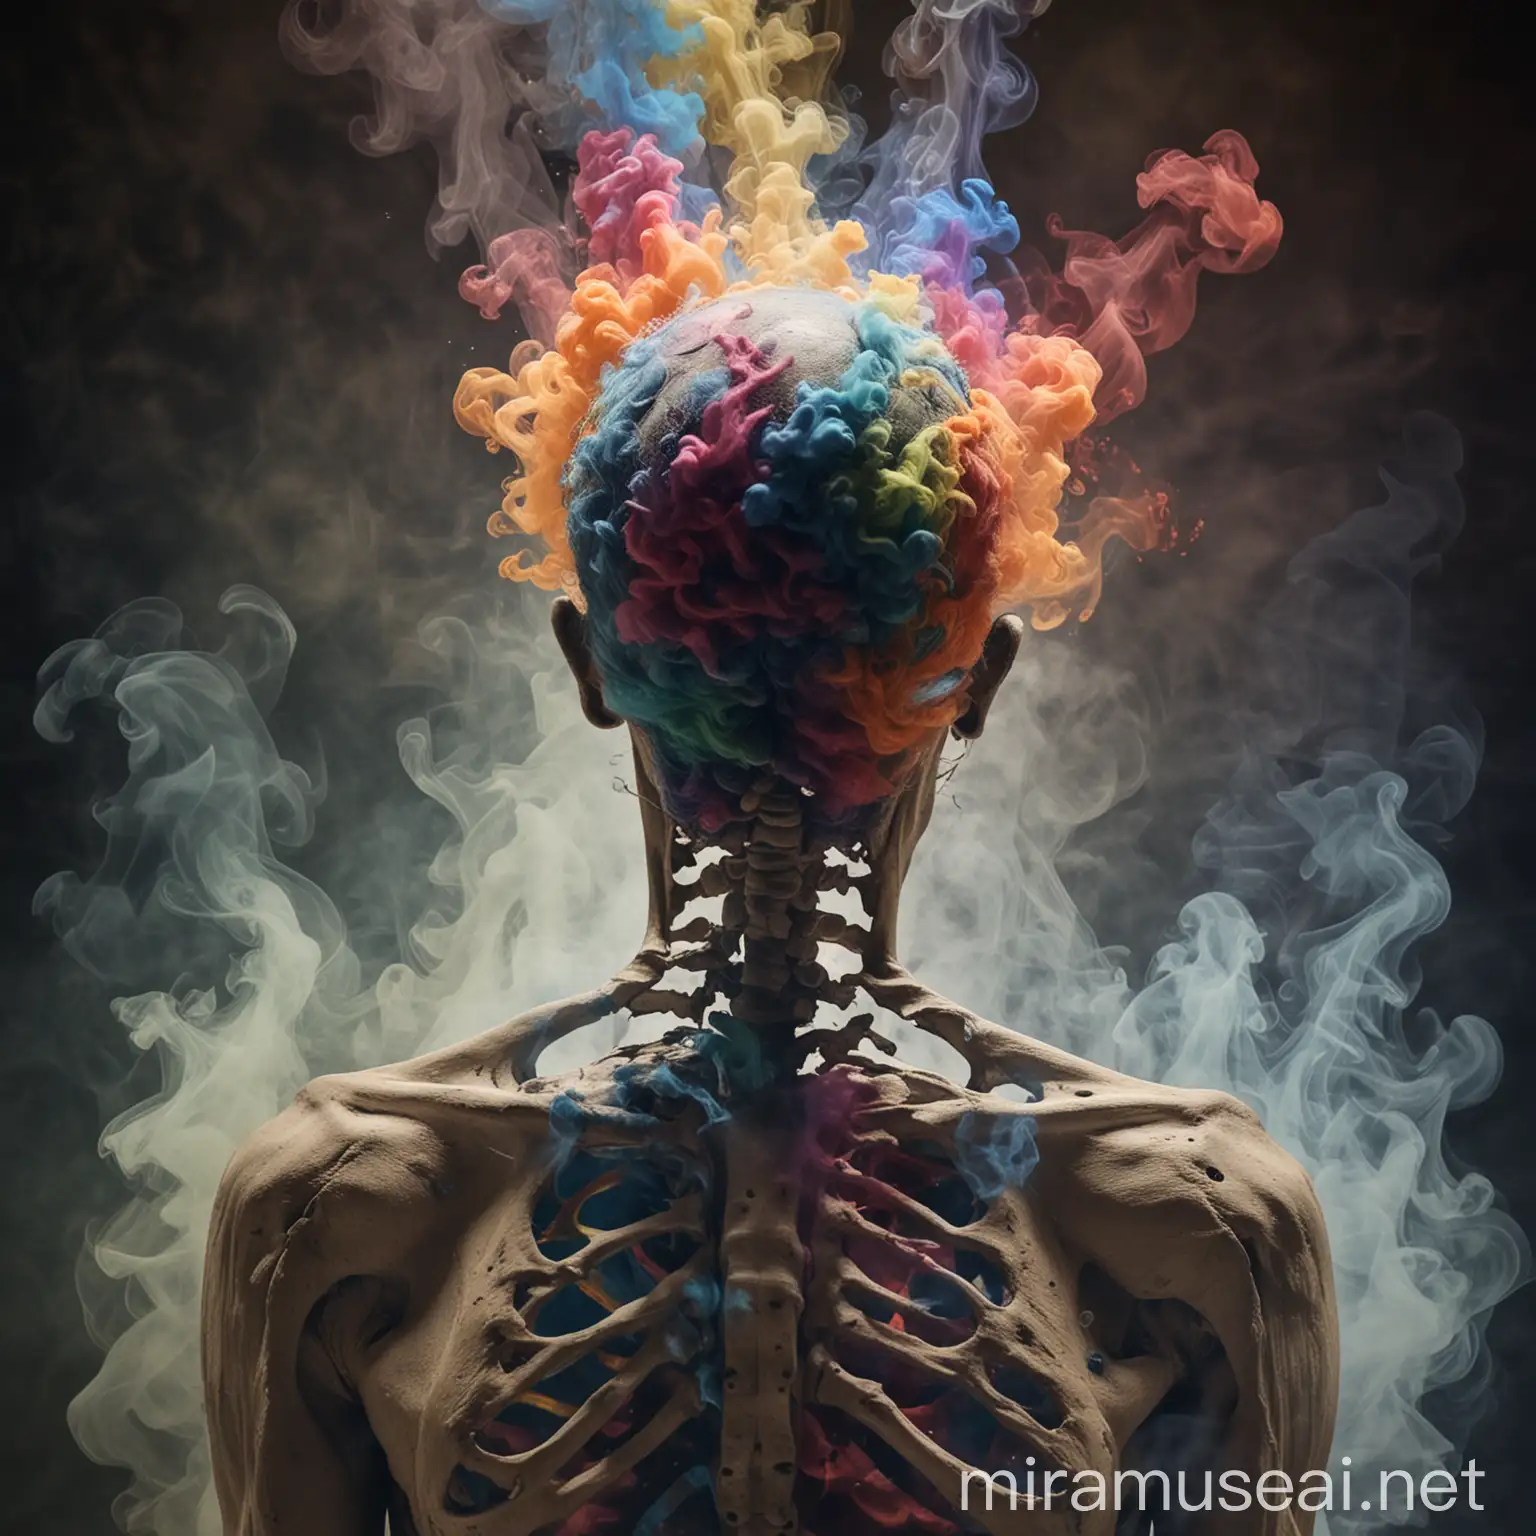 Resolute Man Amid Chaos Abstract Portrait with Burst of Colorful Smoke